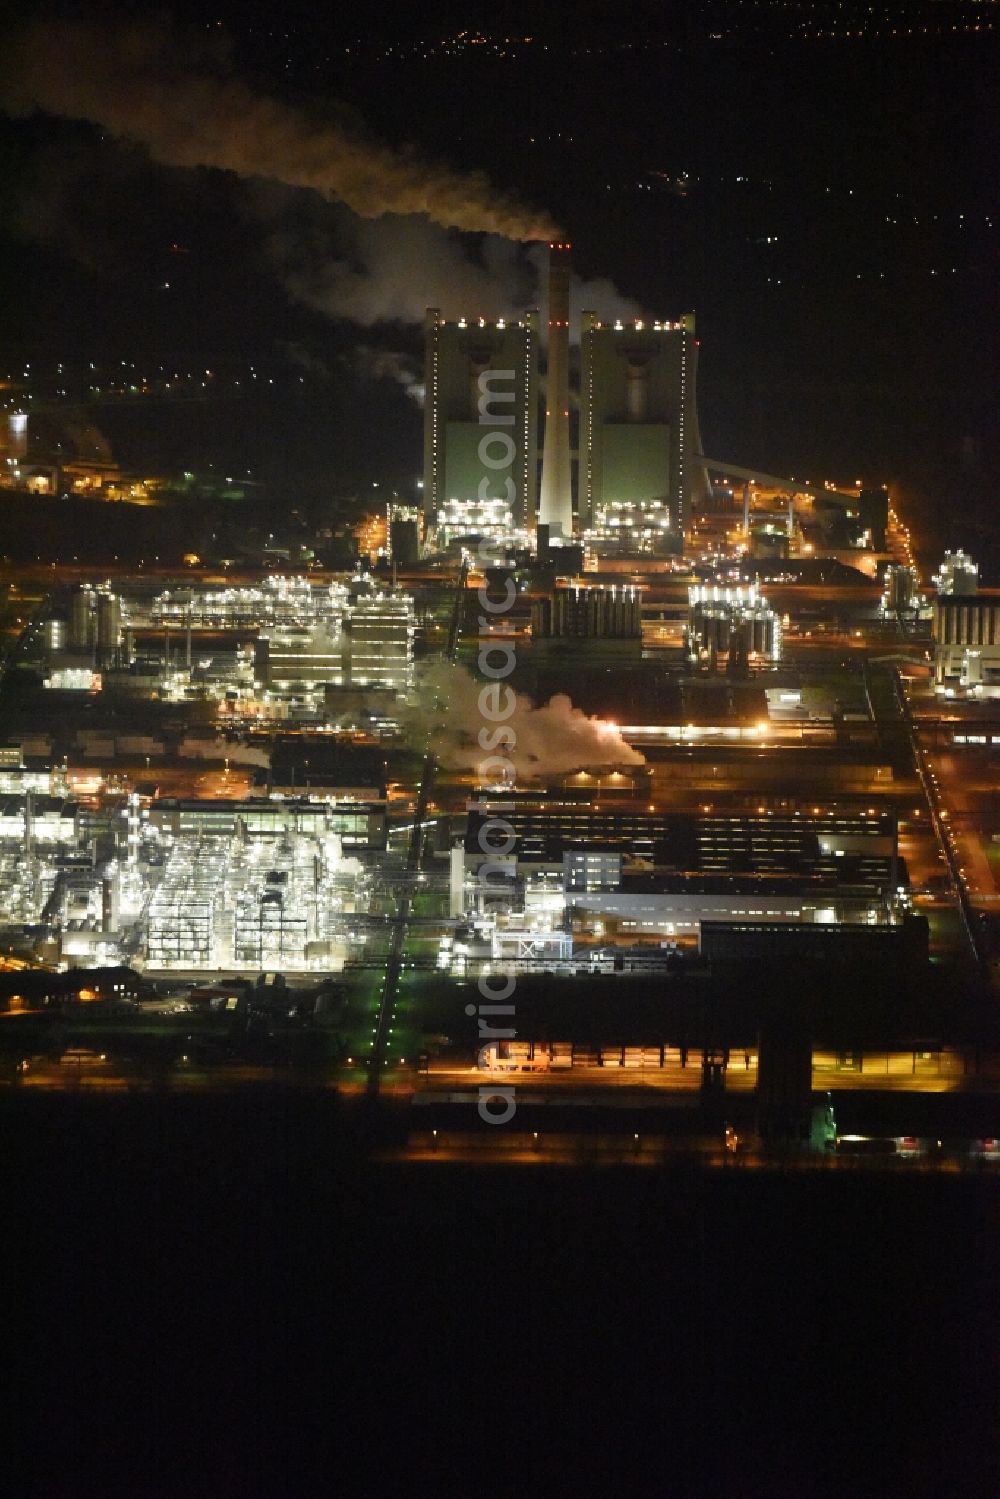 Schkopau at night from the bird perspective: Night view of Refinery equipment and management systems on the factory premises of the chemical manufacturers Dow Olefinverbund GmbH in Schkopau in the state Saxony-Anhalt